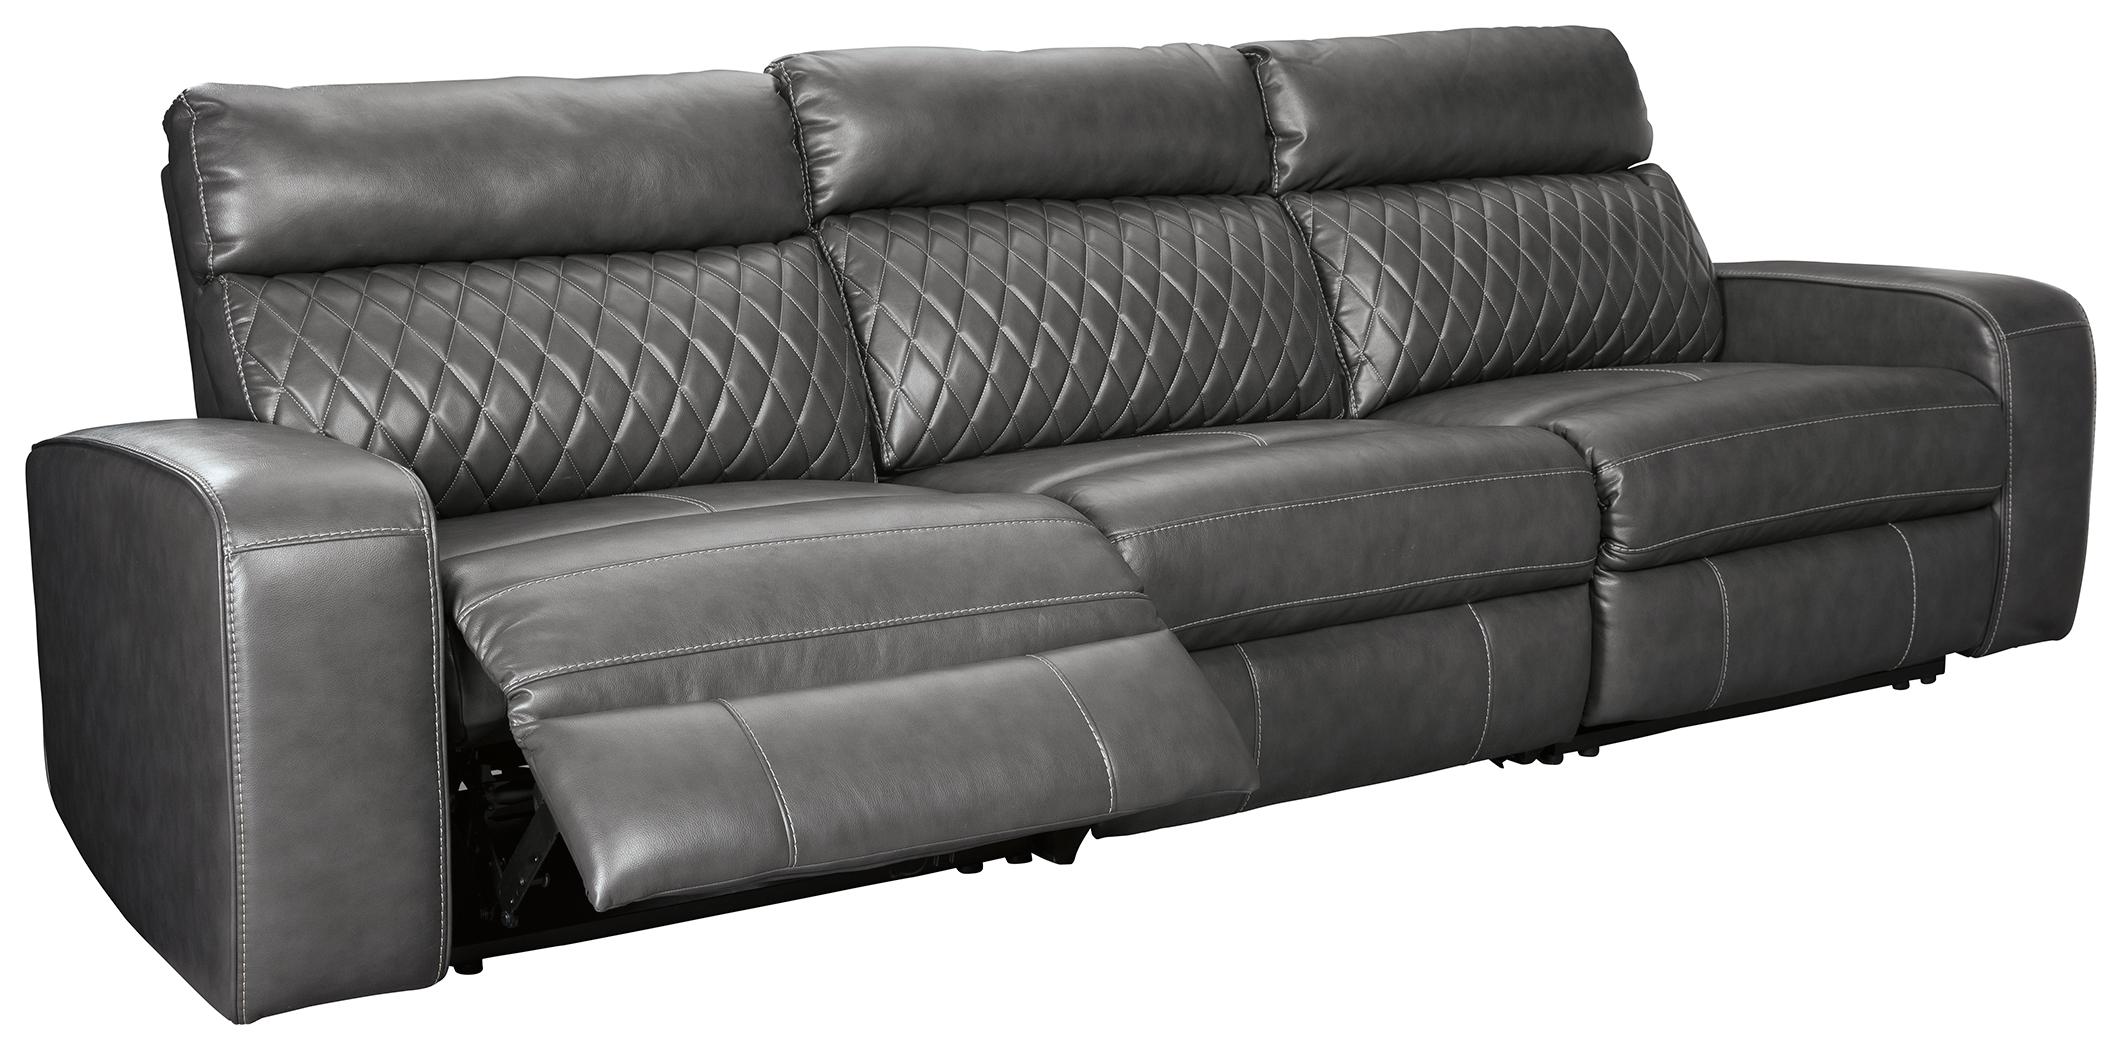 ASHLEY FURNITURE 55203S4 Samperstone 3-piece Power Reclining Sectional